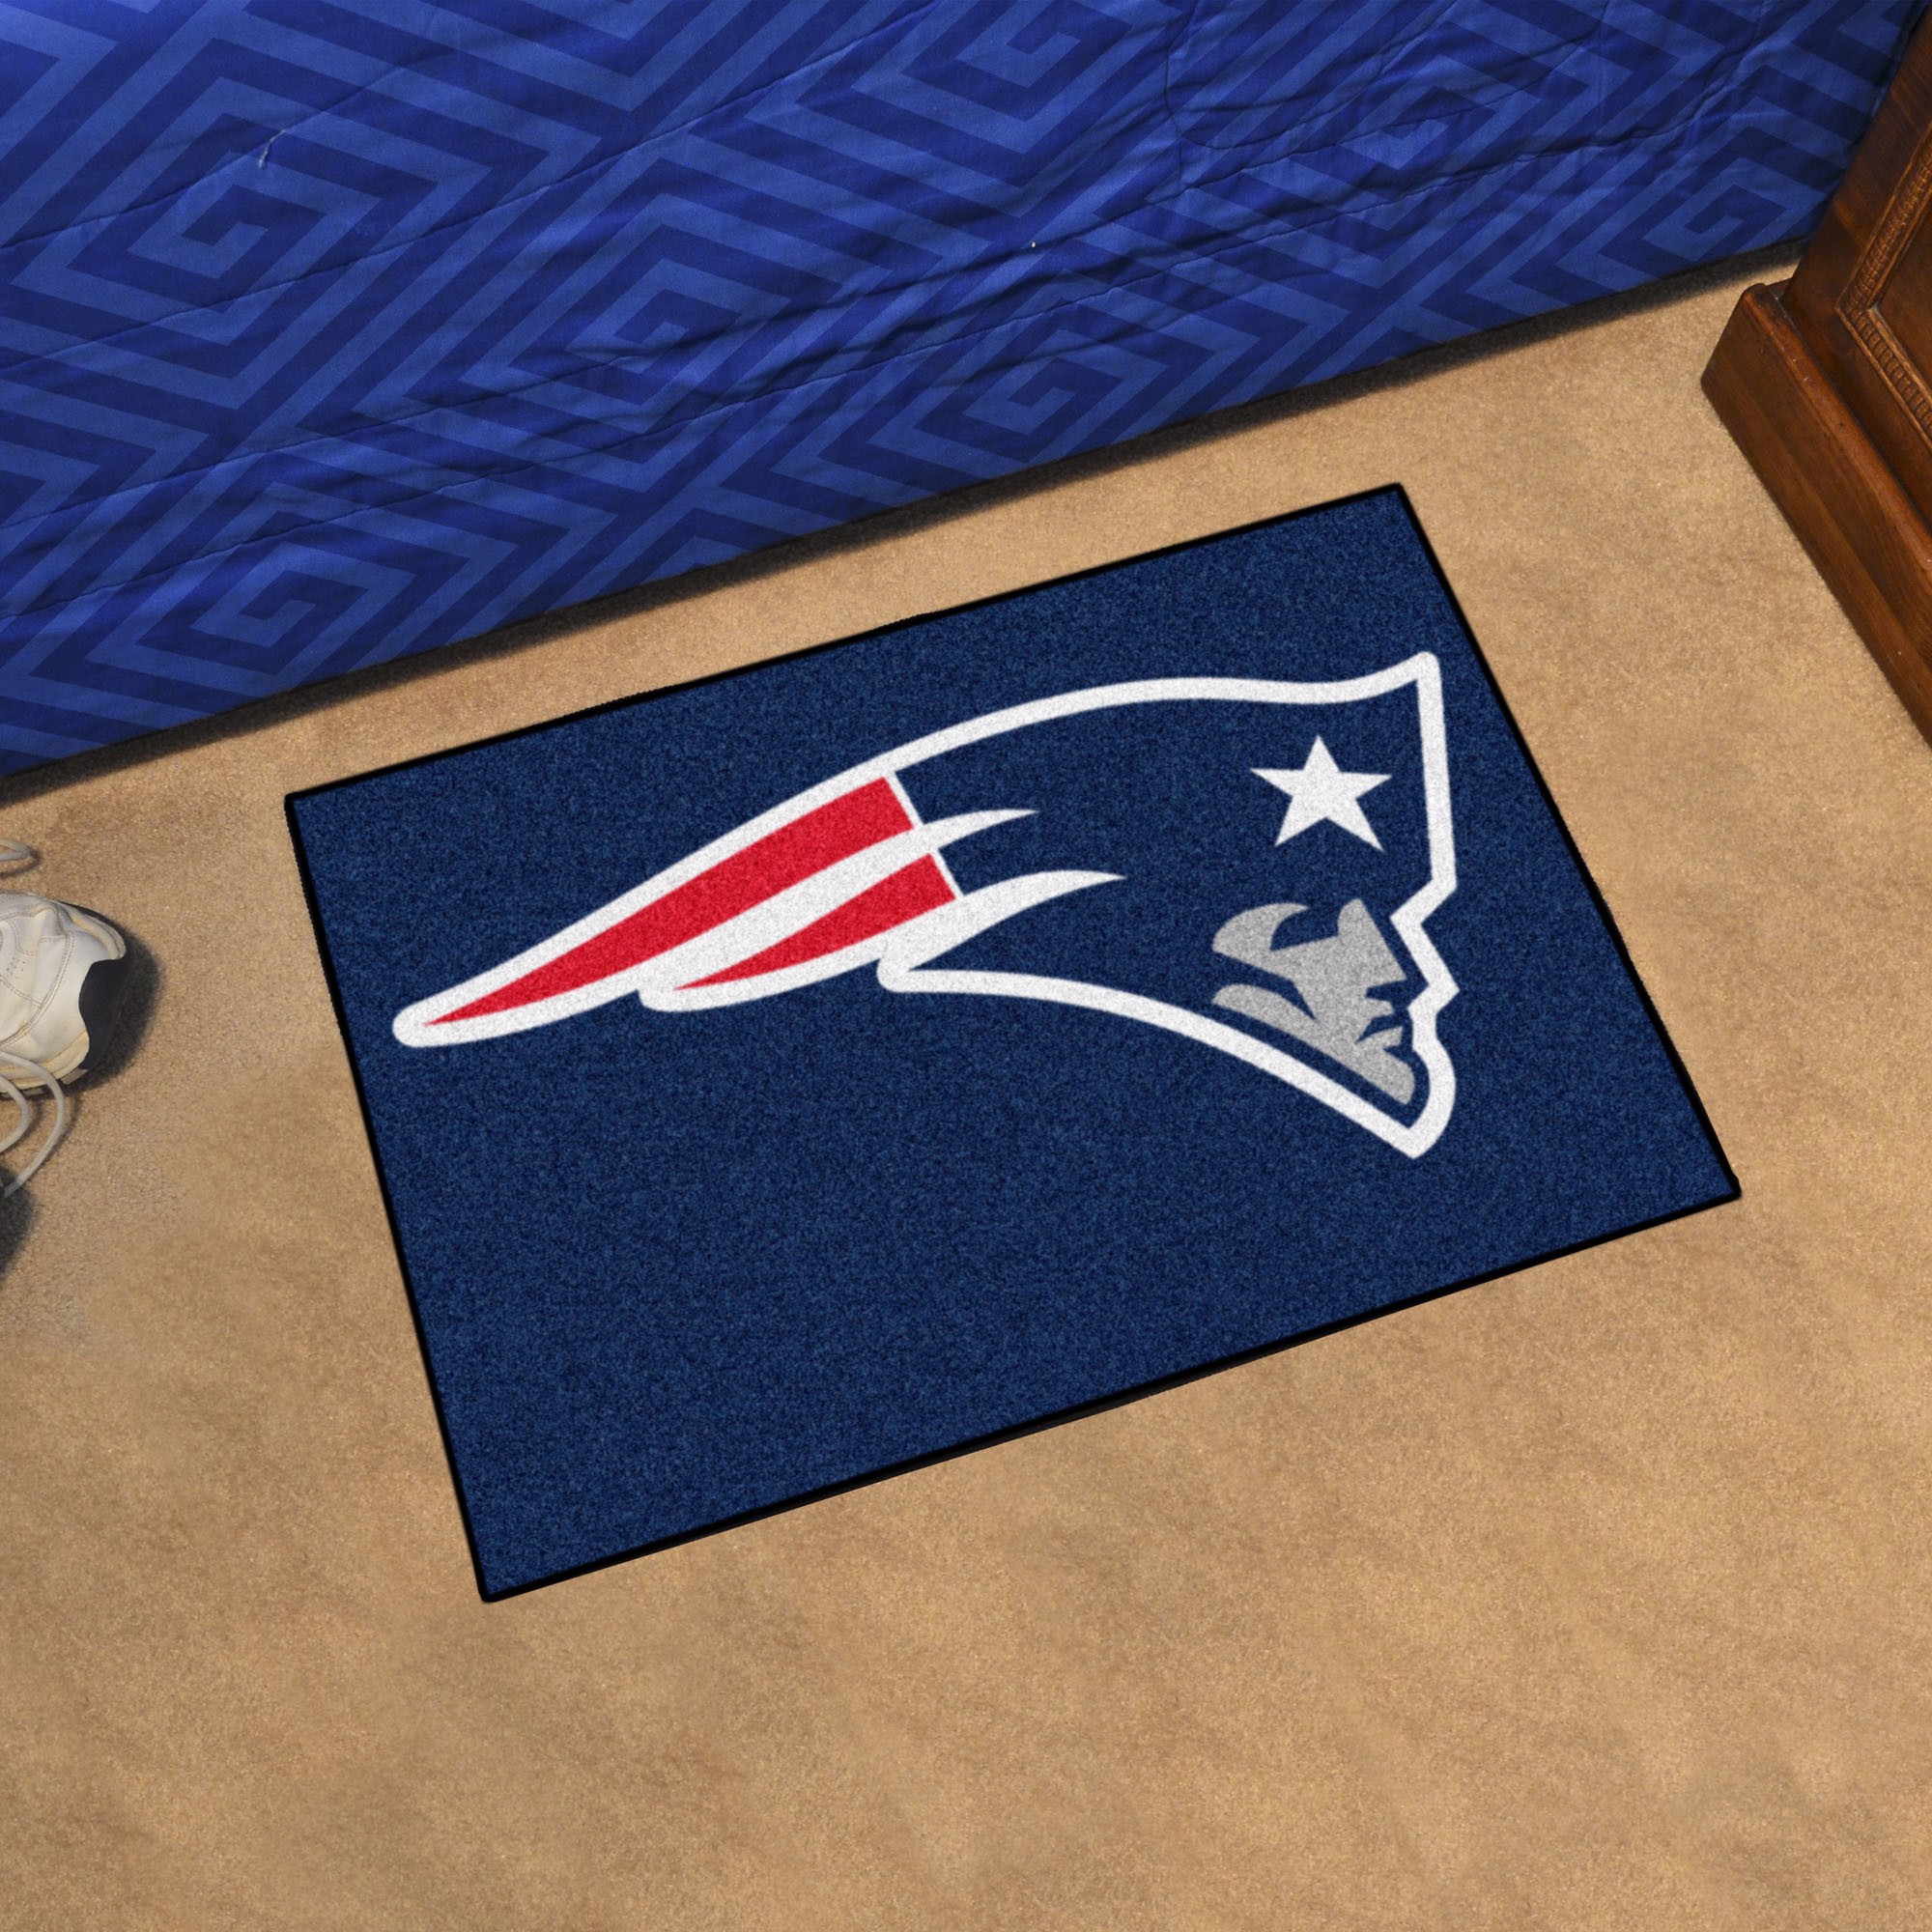 New England Patriots Starter Mat | Fanmats - Sports Licensing Solutions ...